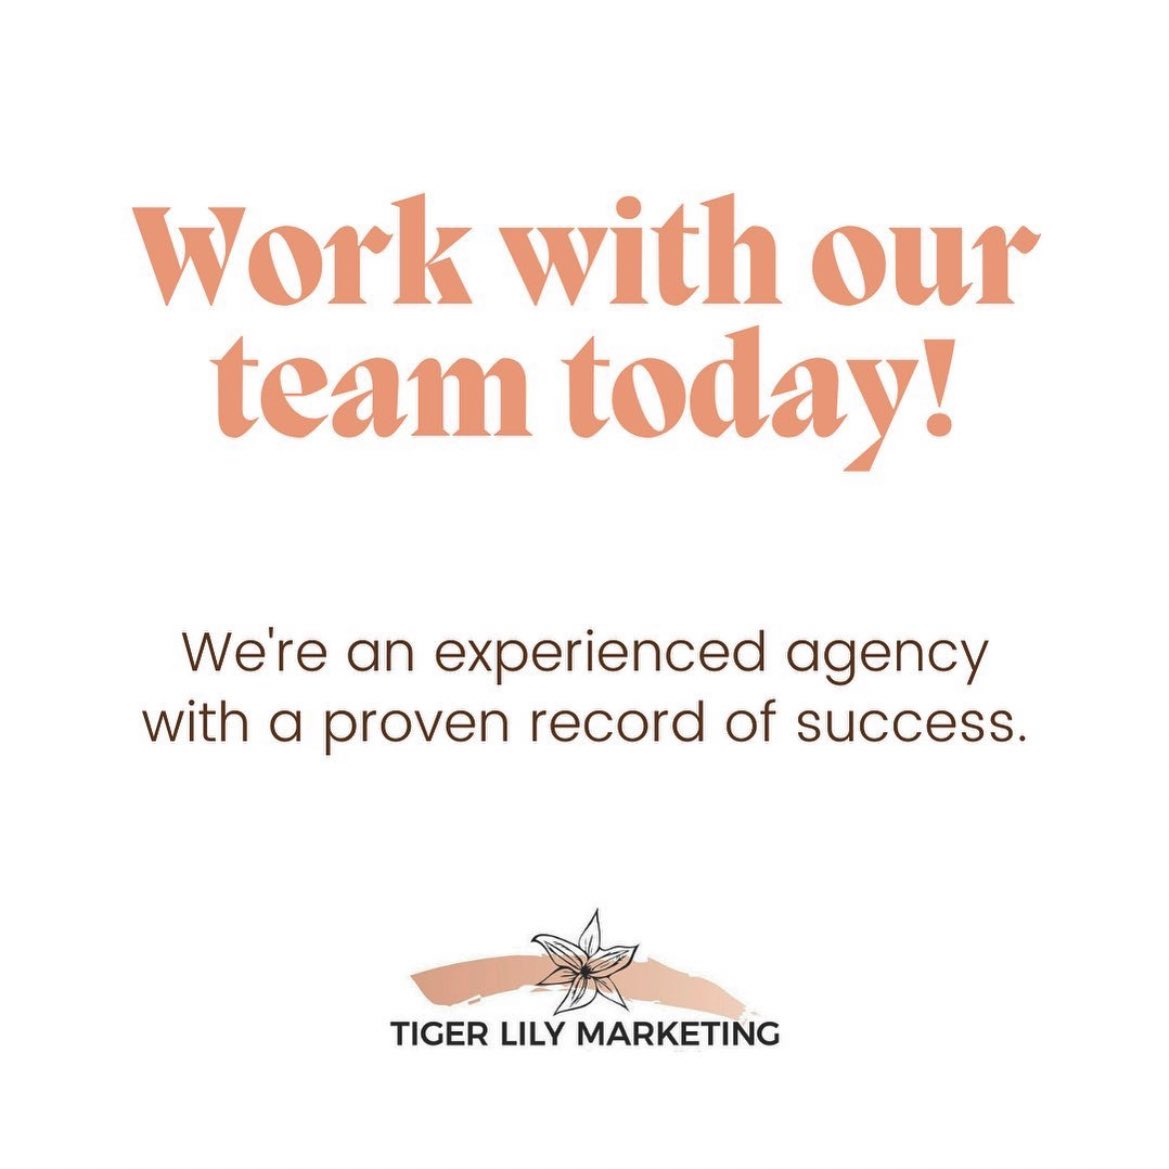 Our Tiger Lily team does it all — marketing strategies, brand logos, social media management, crisis communications and so much more. Visit our website to see how we can support your business. #Ottawa 🔗: tigerlilymarketing.com